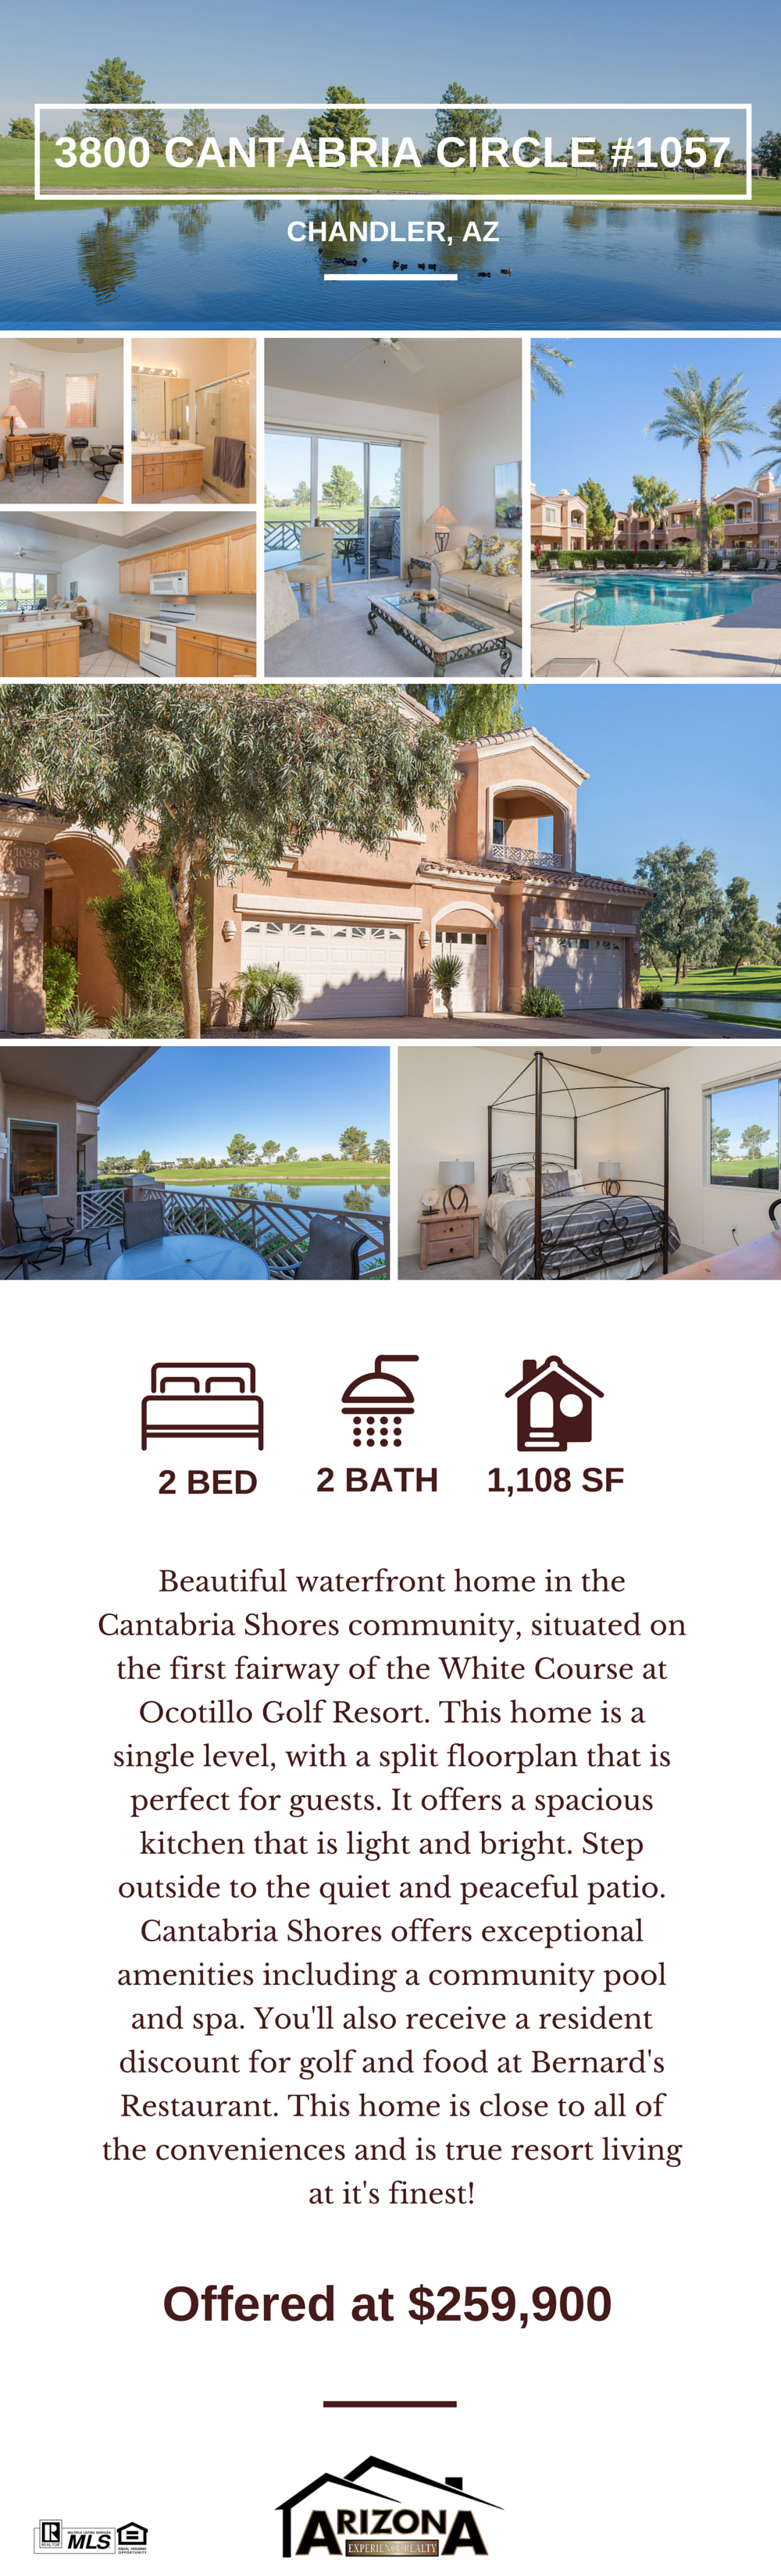 AZEXP Featured Listing blog - 3800 Cantabria Circle (2)